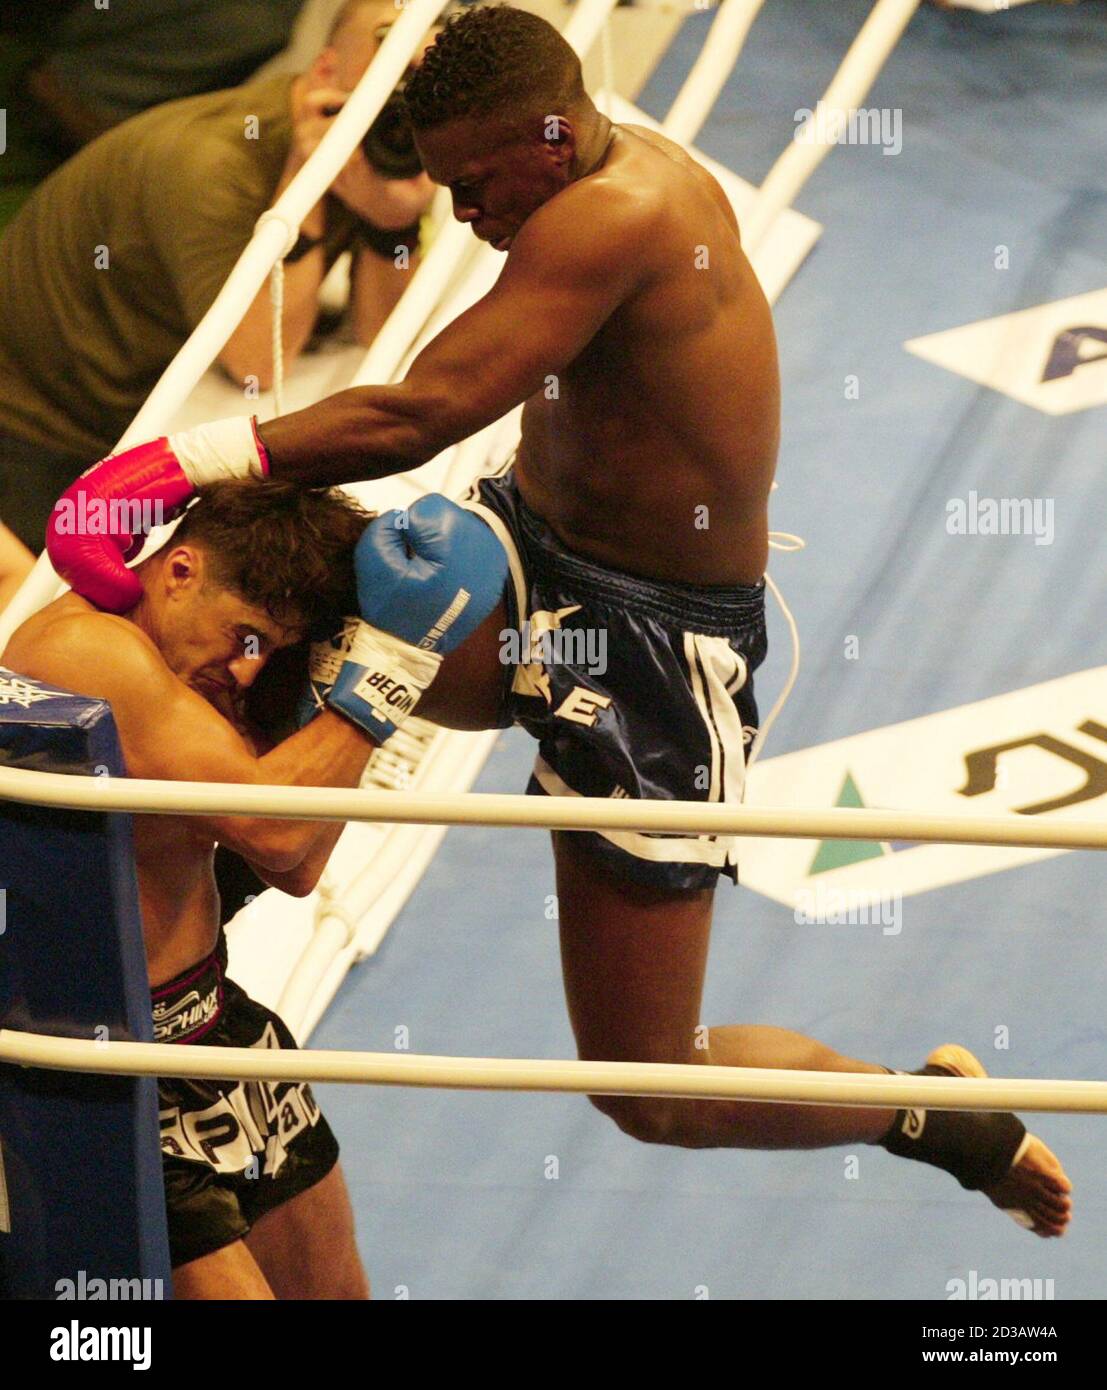 Remy Bonjasky (R) from Holland, champion of K-1 World Grand Prix 2003 in  Las Vegas, attacks Aziz Khattou from Belgium at the super fight match of  the Aruze K-1 World Grand Prix